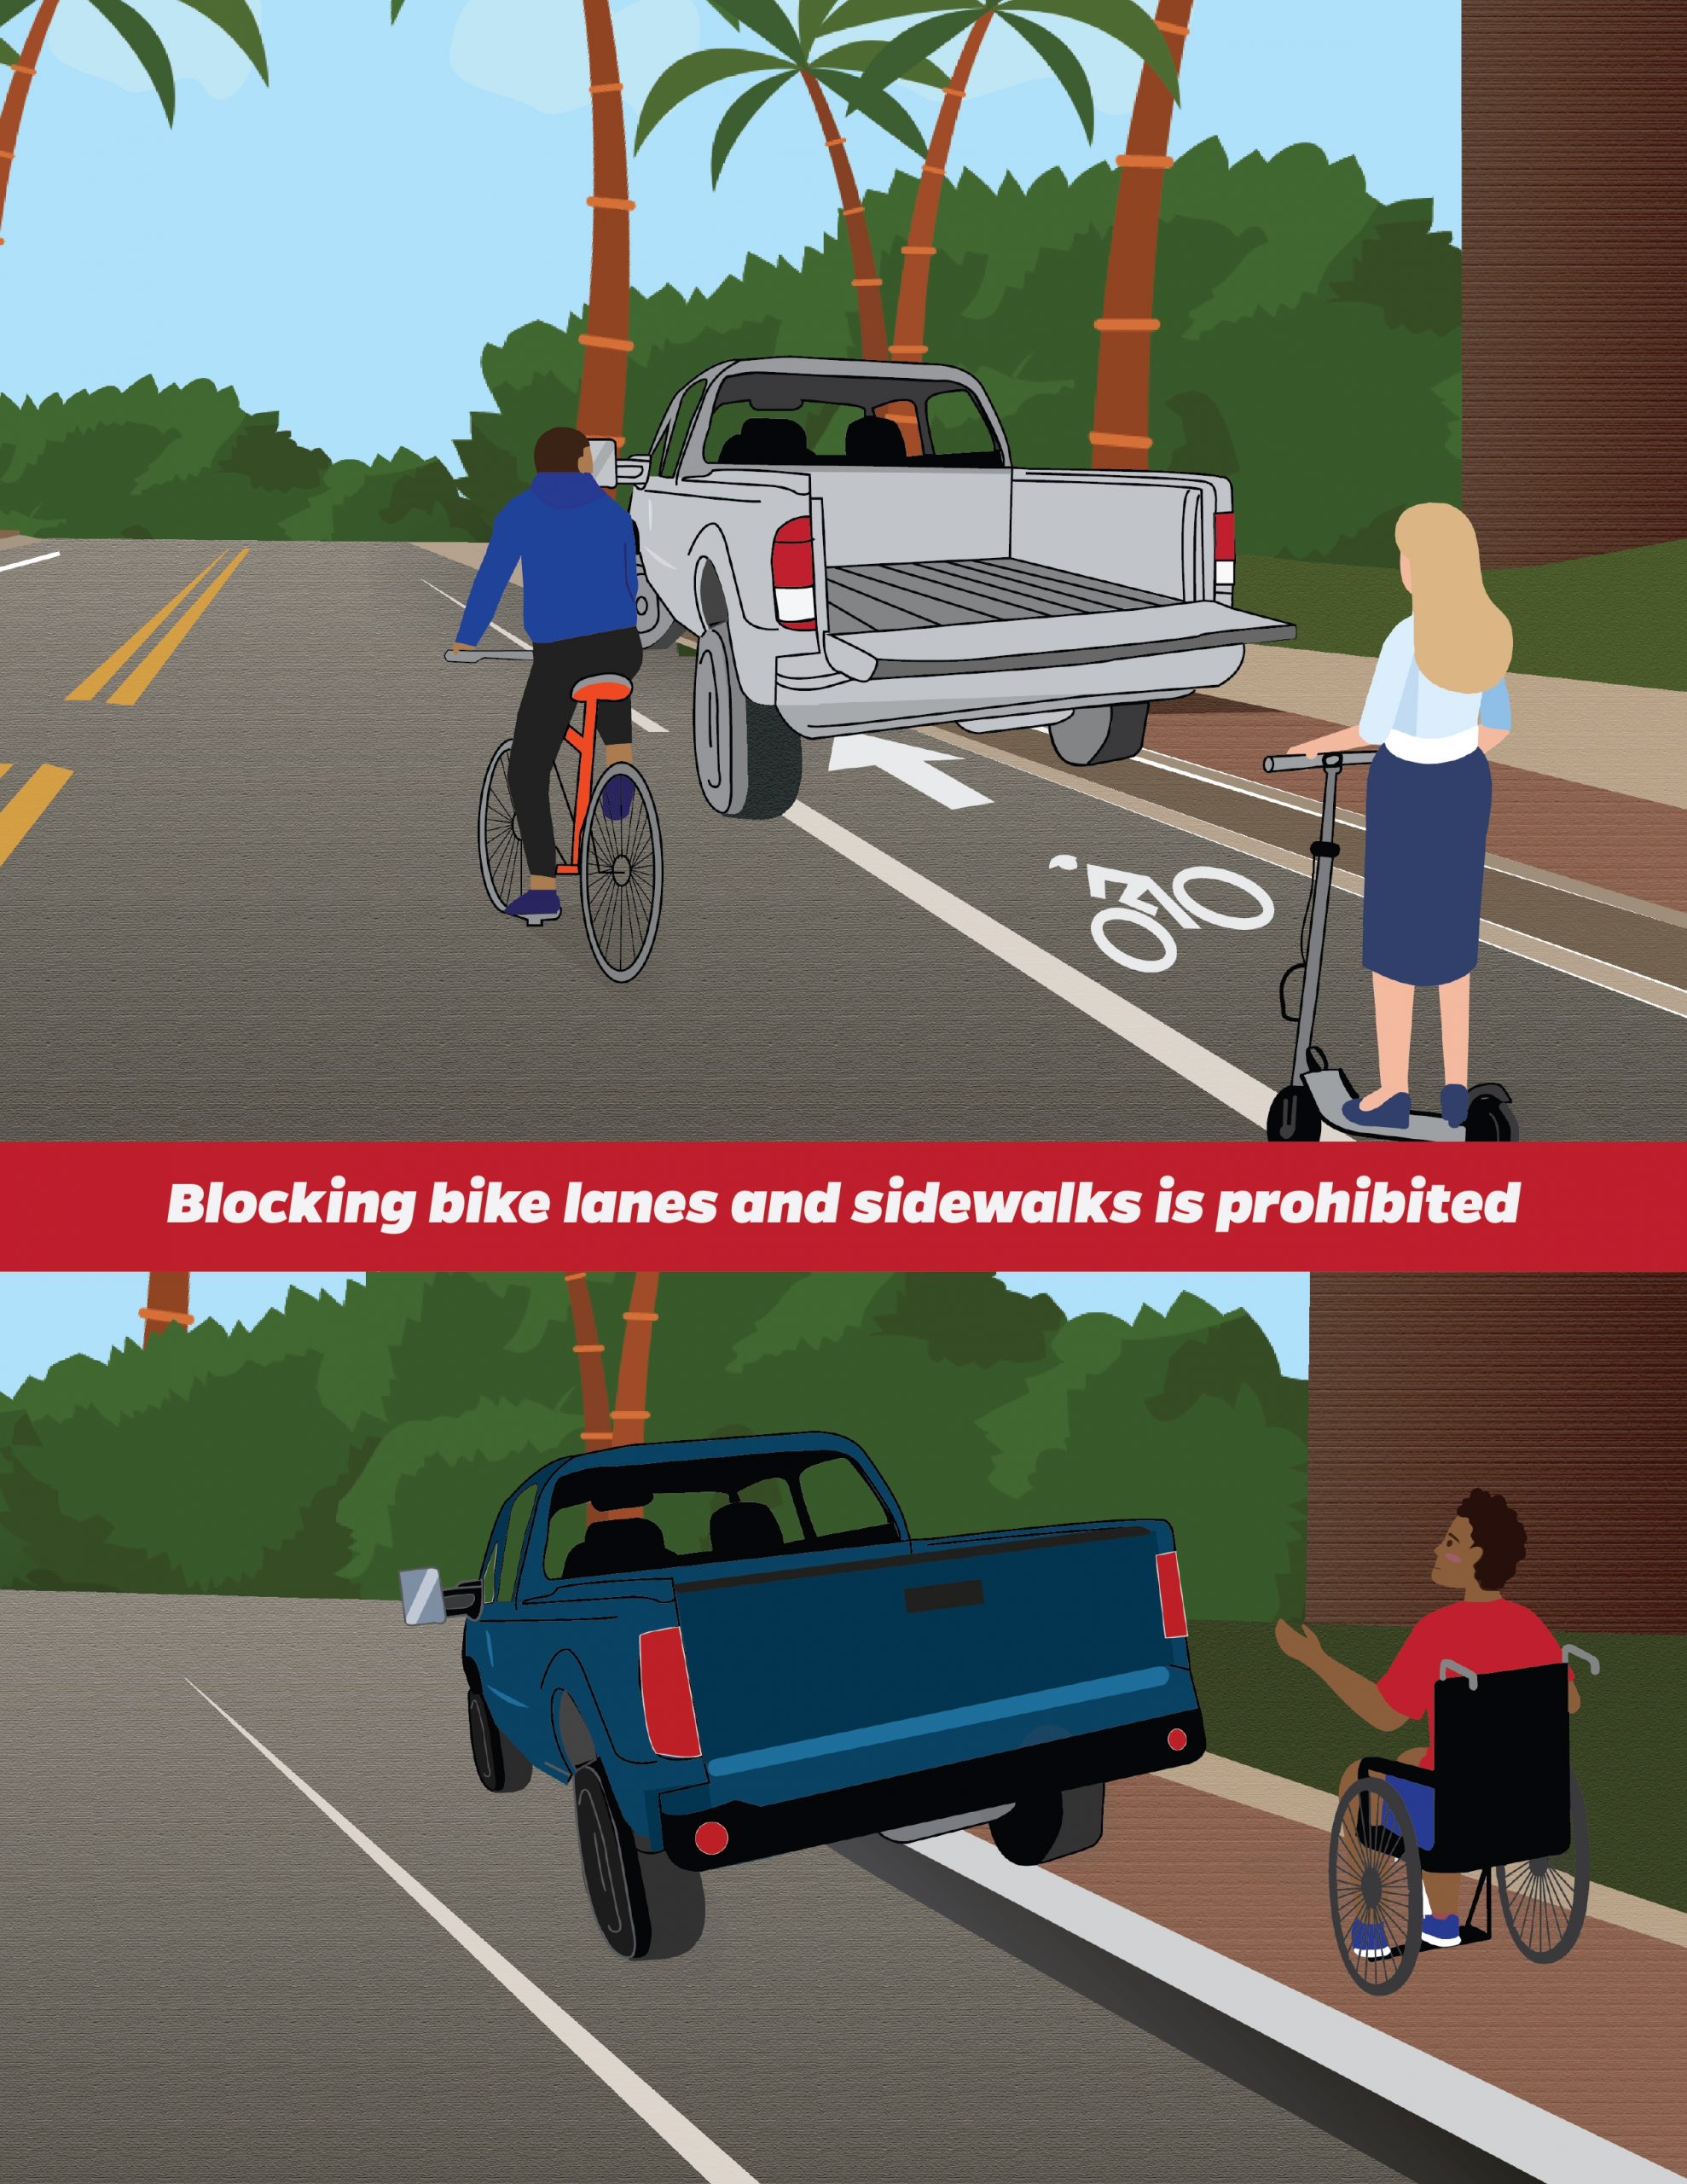 Reminder to not block bike lanes, sidewalks, and other restricted areas